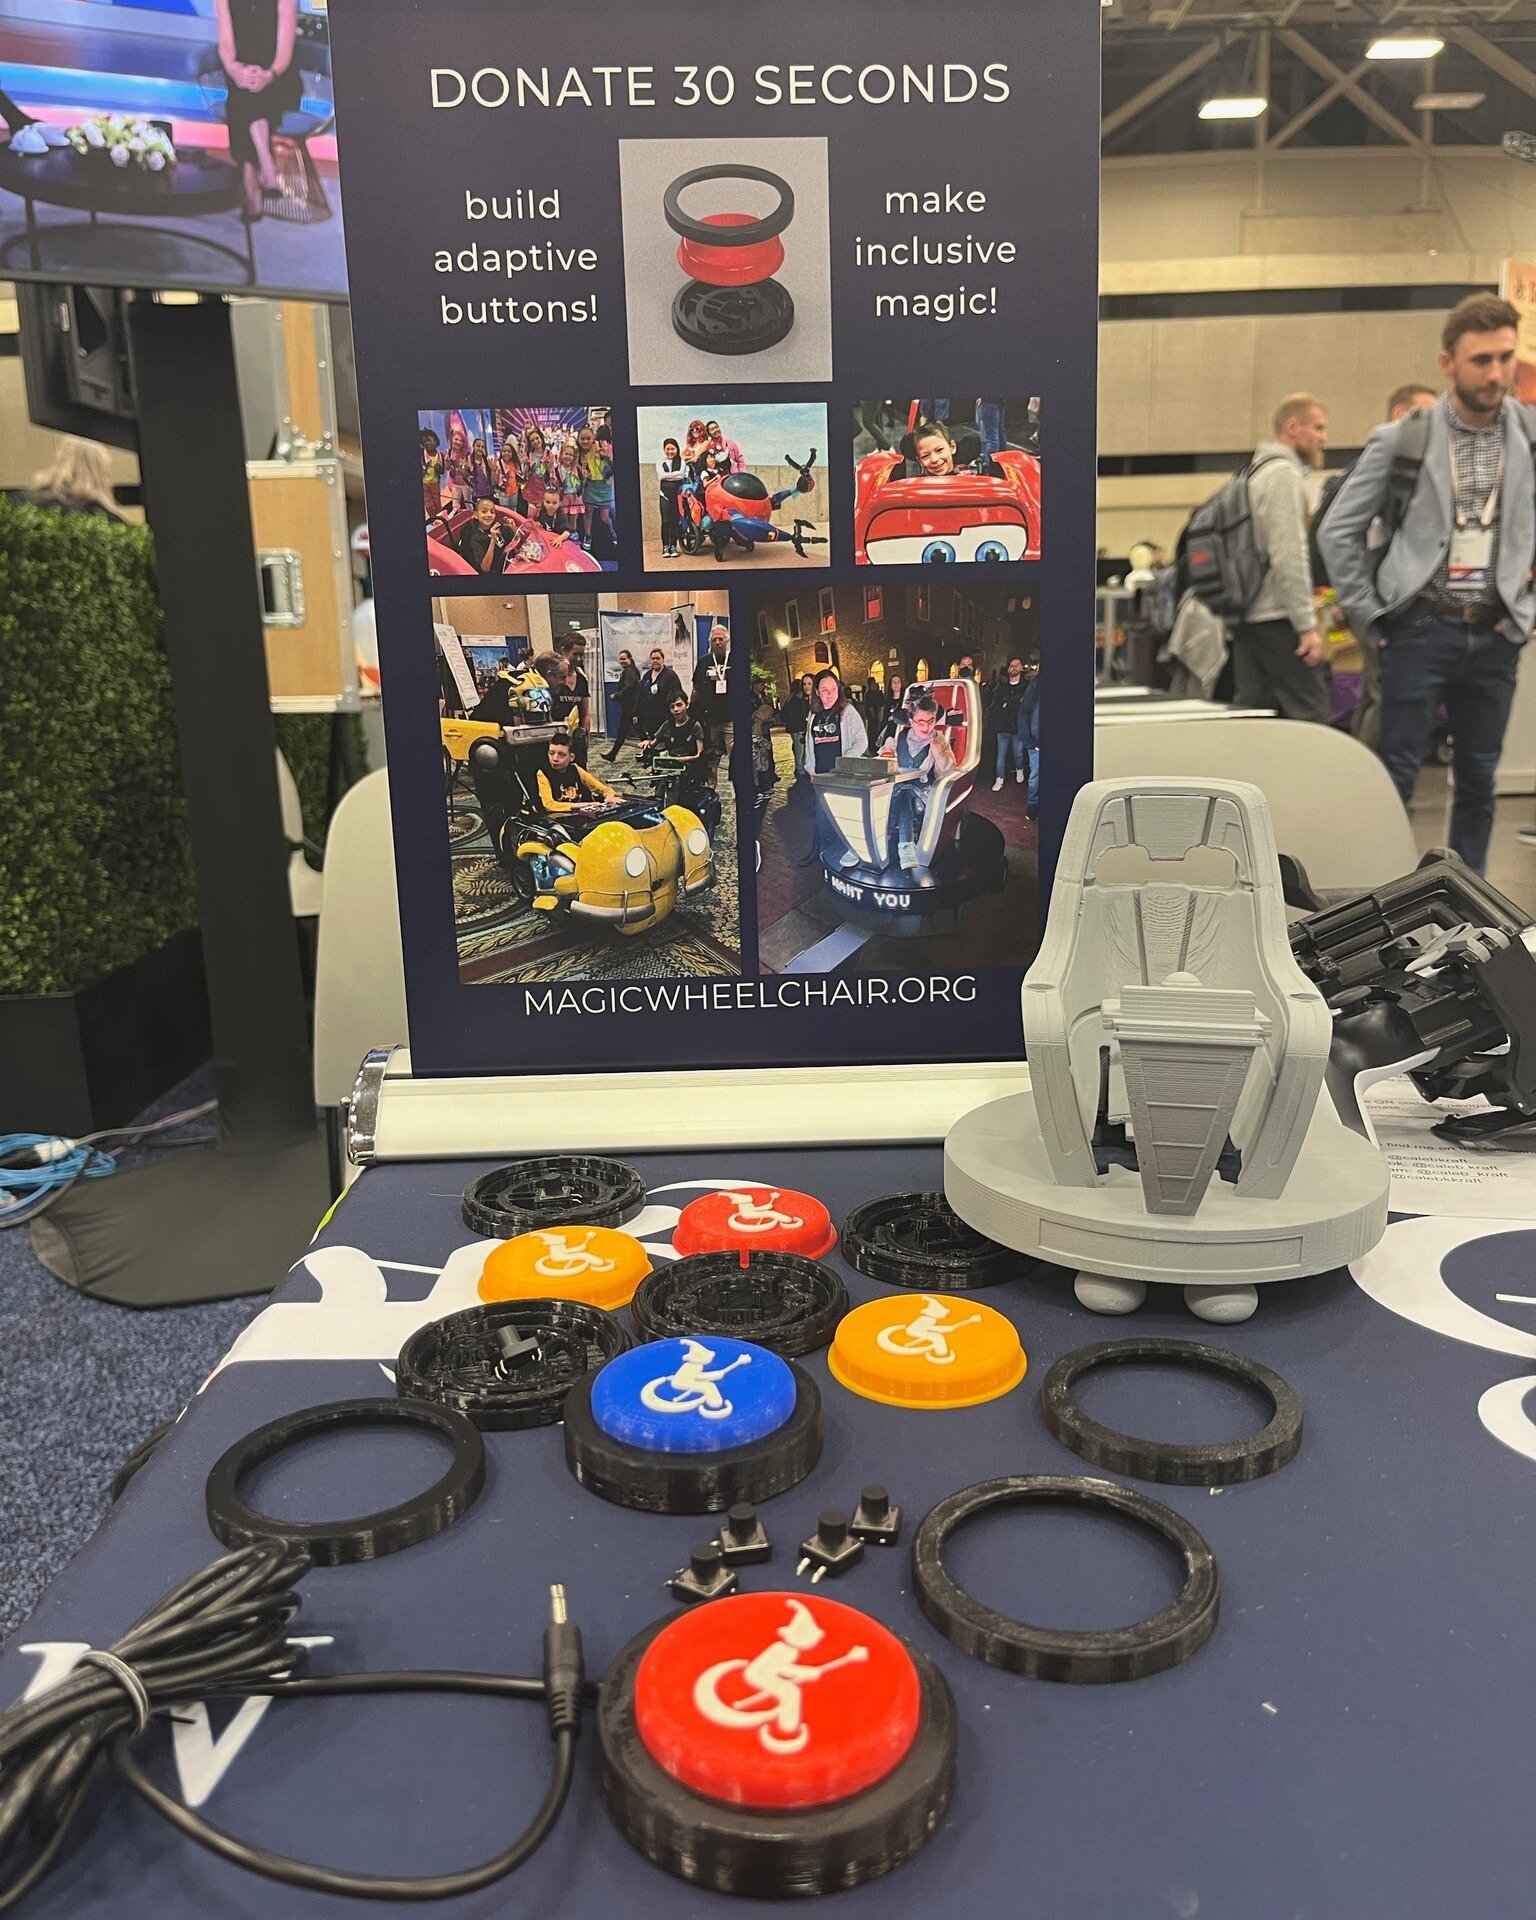 Woo, what a week! We had so much fun connecting with everyone at 3DEXPERIENCE World, making magic and demystifying adaptive buttons with The Controller Project's @caleb_kraft 🕹  We even launched a few more builds for 2024! 

#magicwheelchair #3DXW24